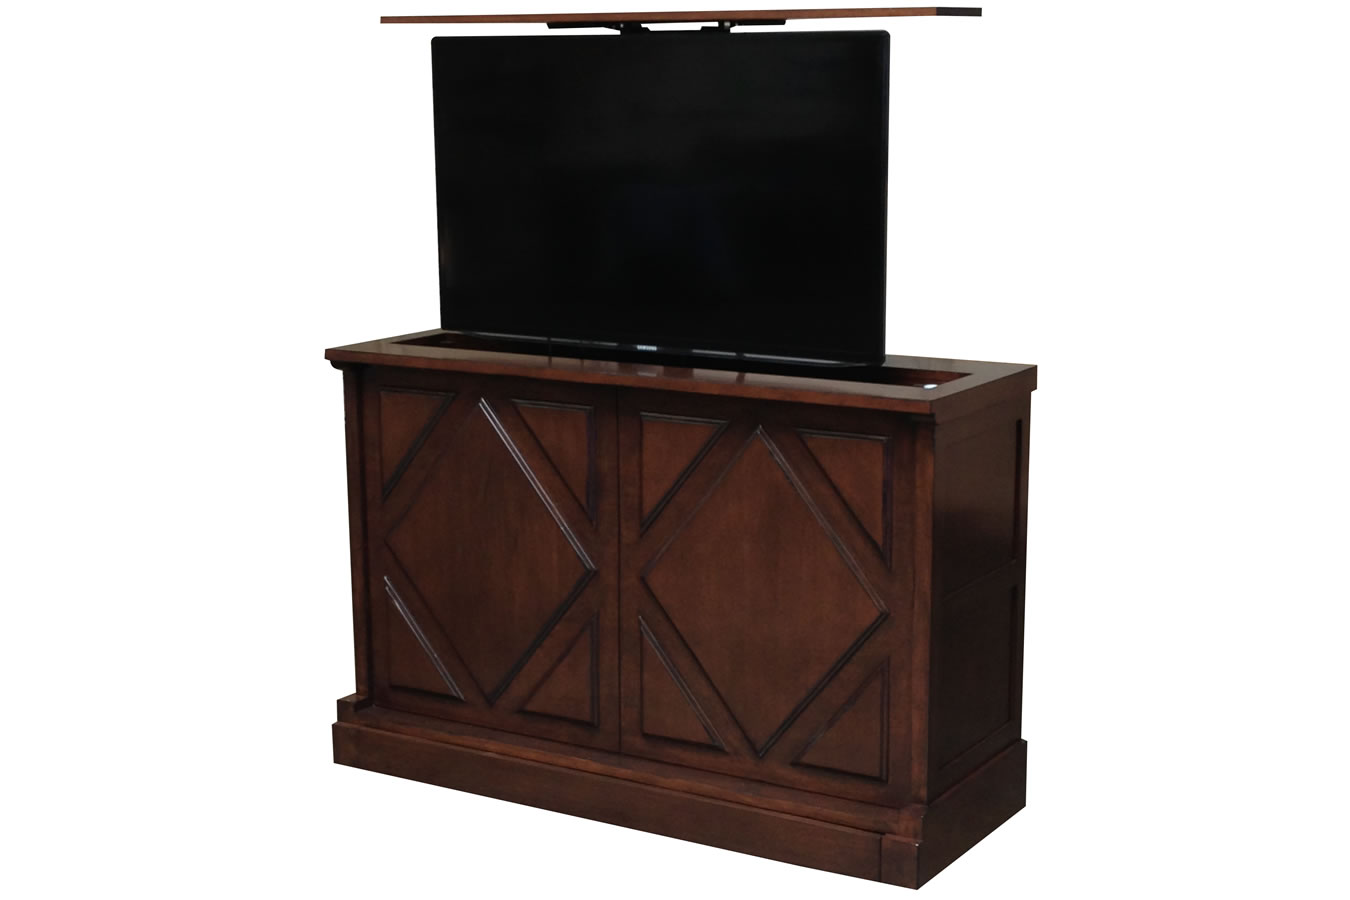 Poncho Villa retracable TV lift furniture kit holds small to large flat screens